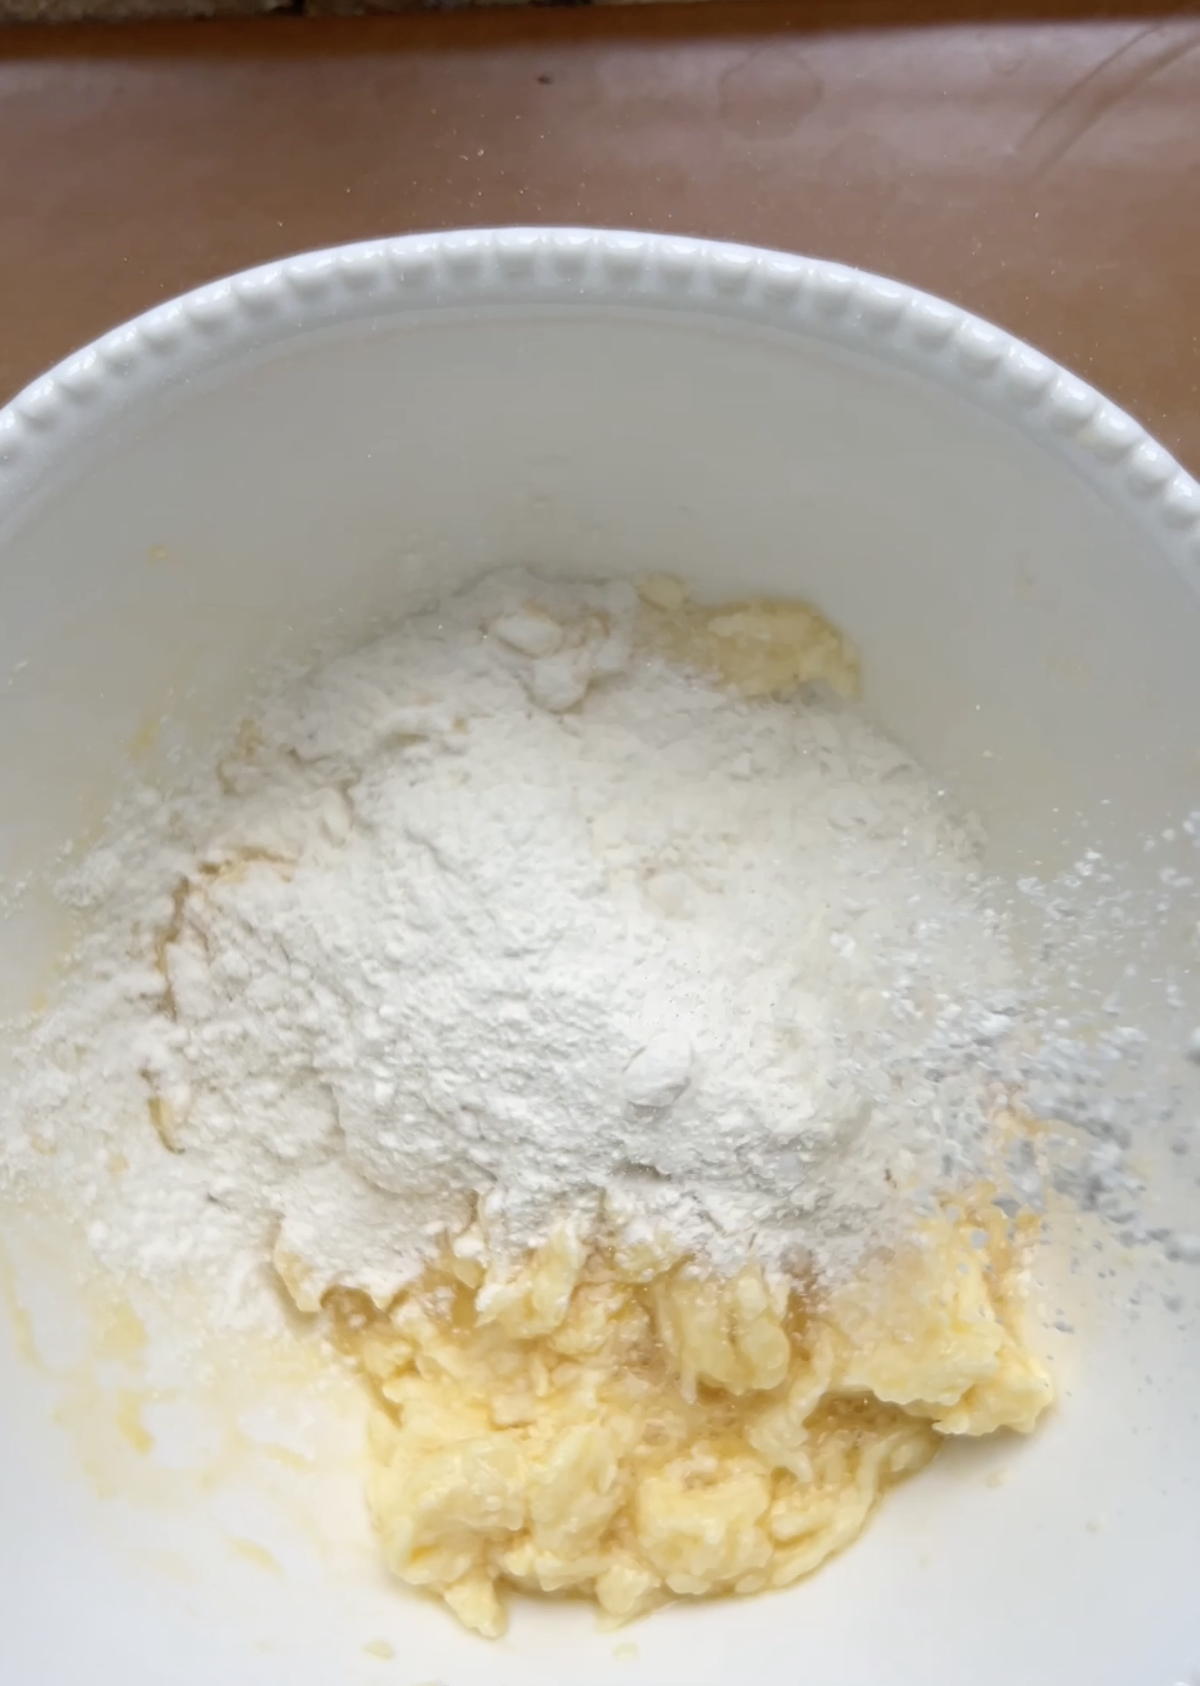 Flour added to a mixture of butter, grated cheeses and egg.